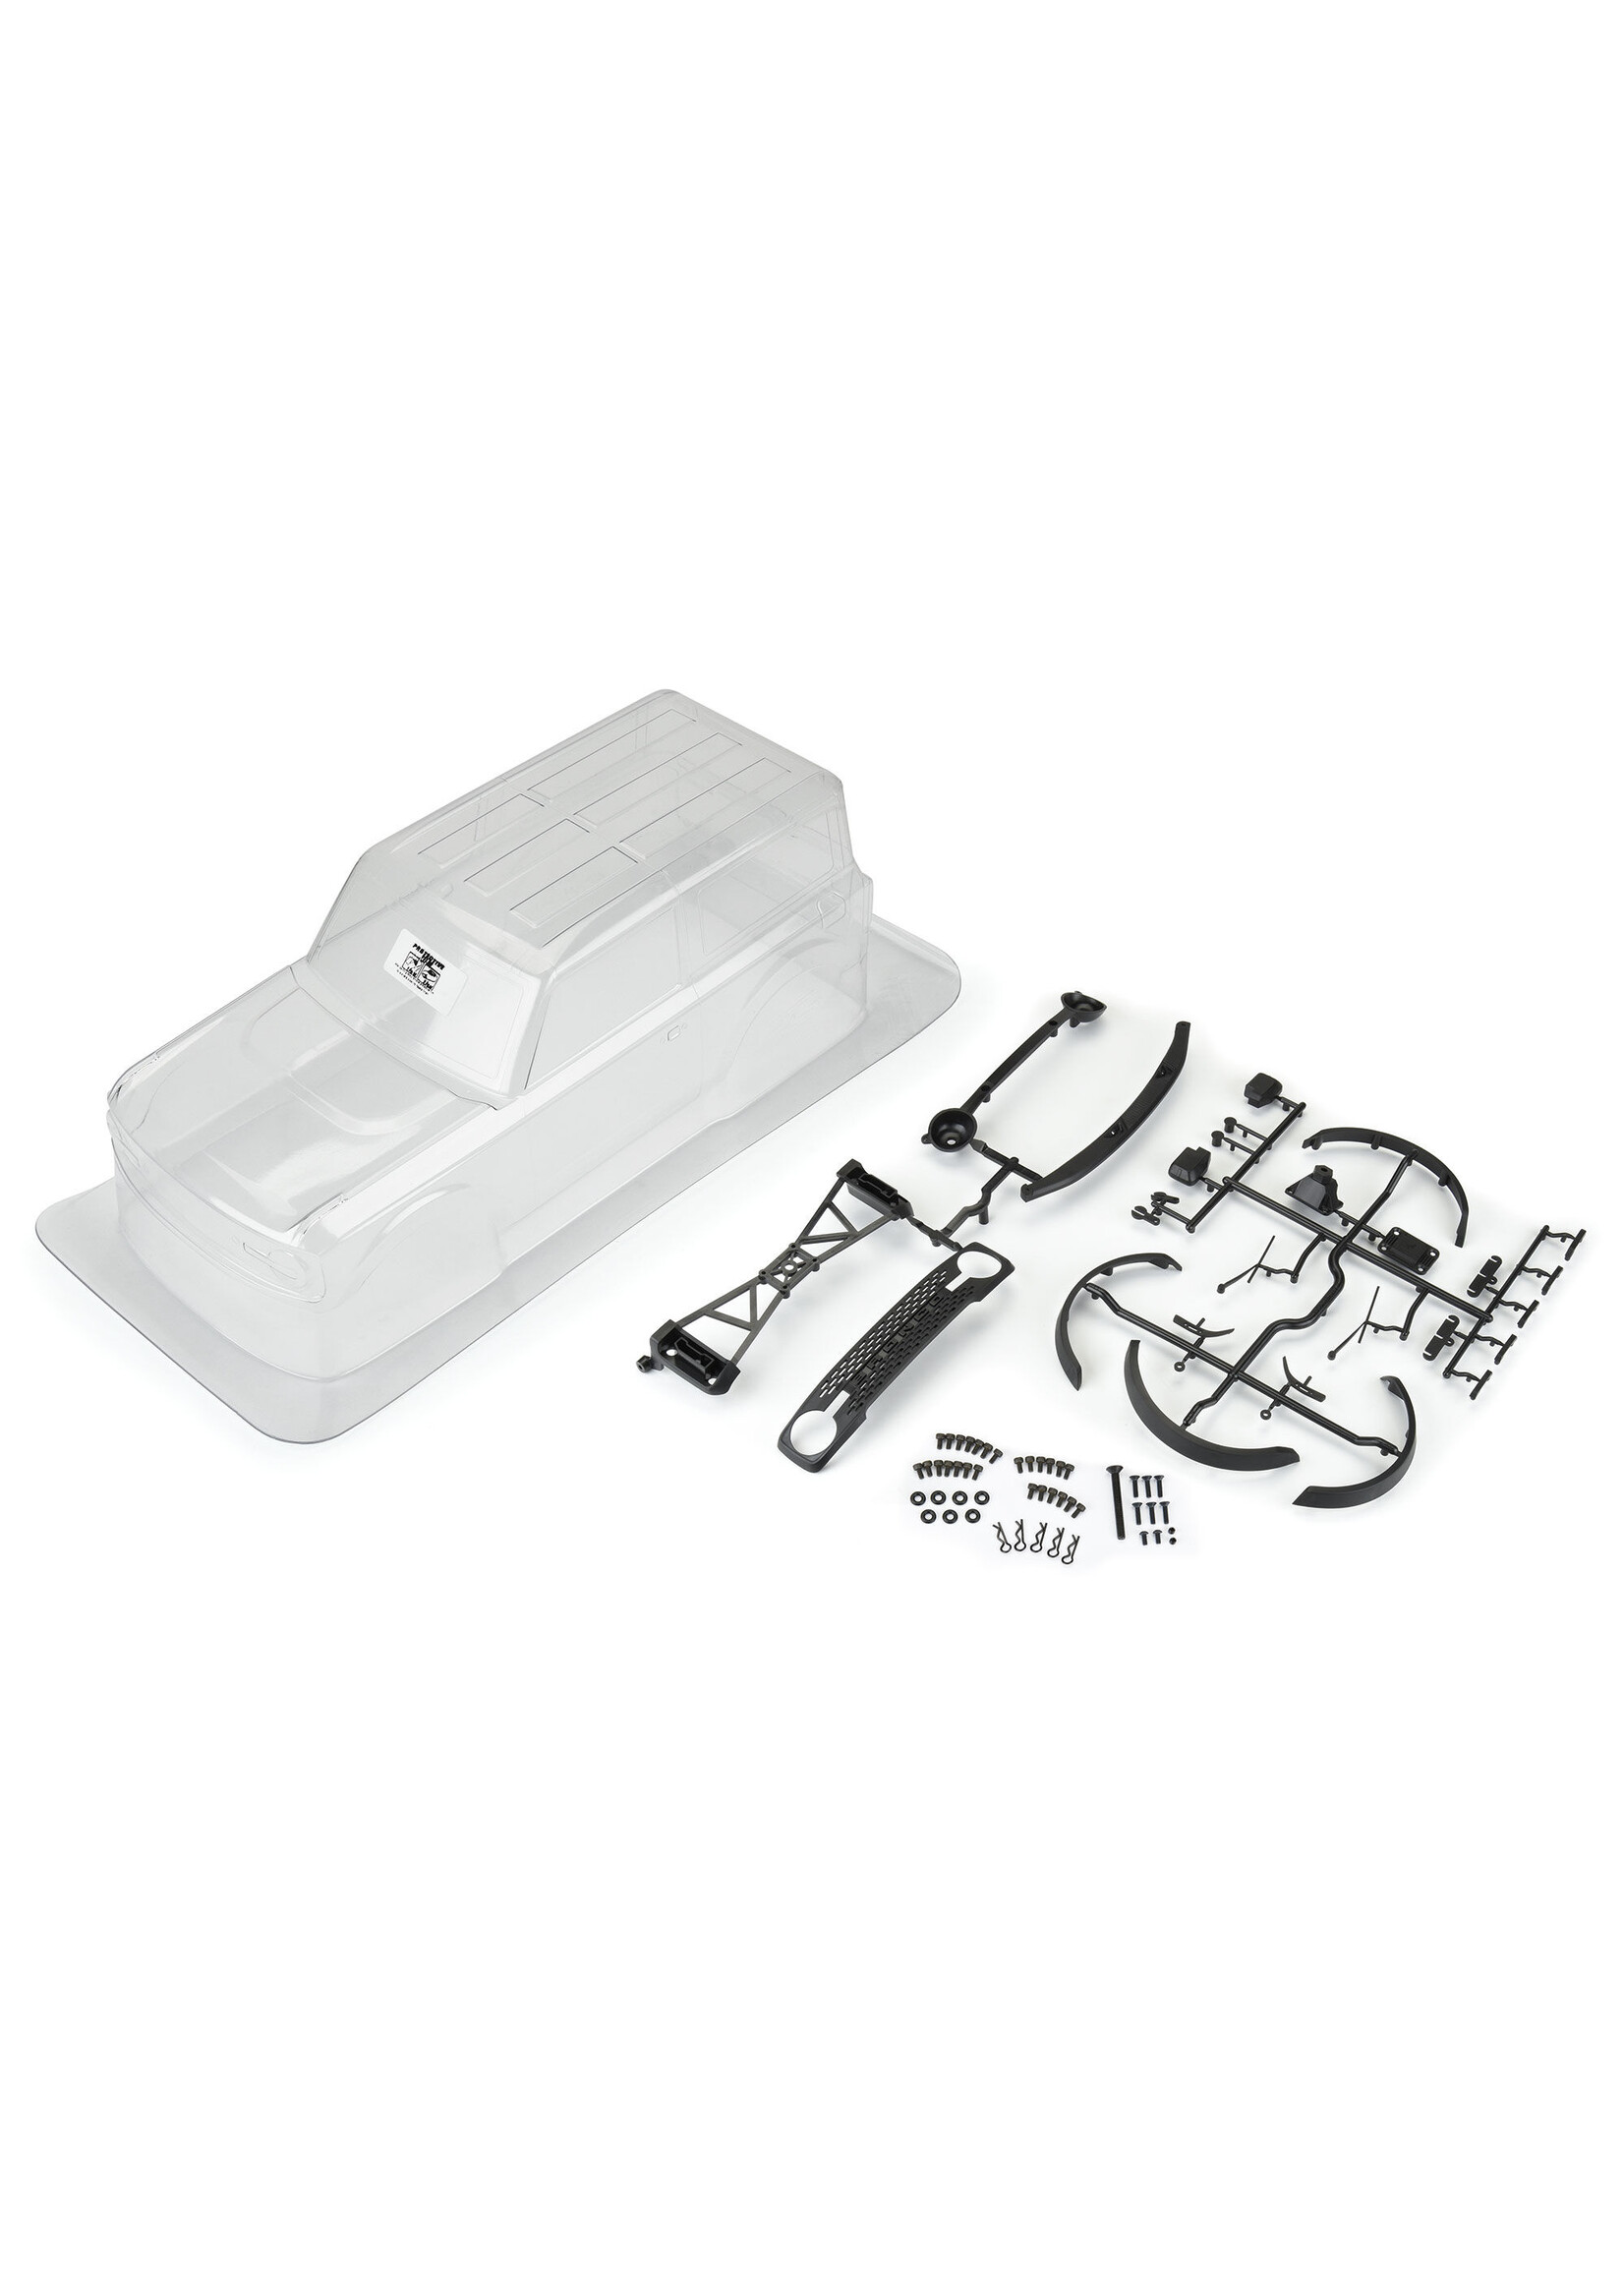 Pro-Line Racing PRO356900 Pro-Line 1/10 2021 Ford Bronco Clear Body Set 11.4" Wheelbase: Crawlers